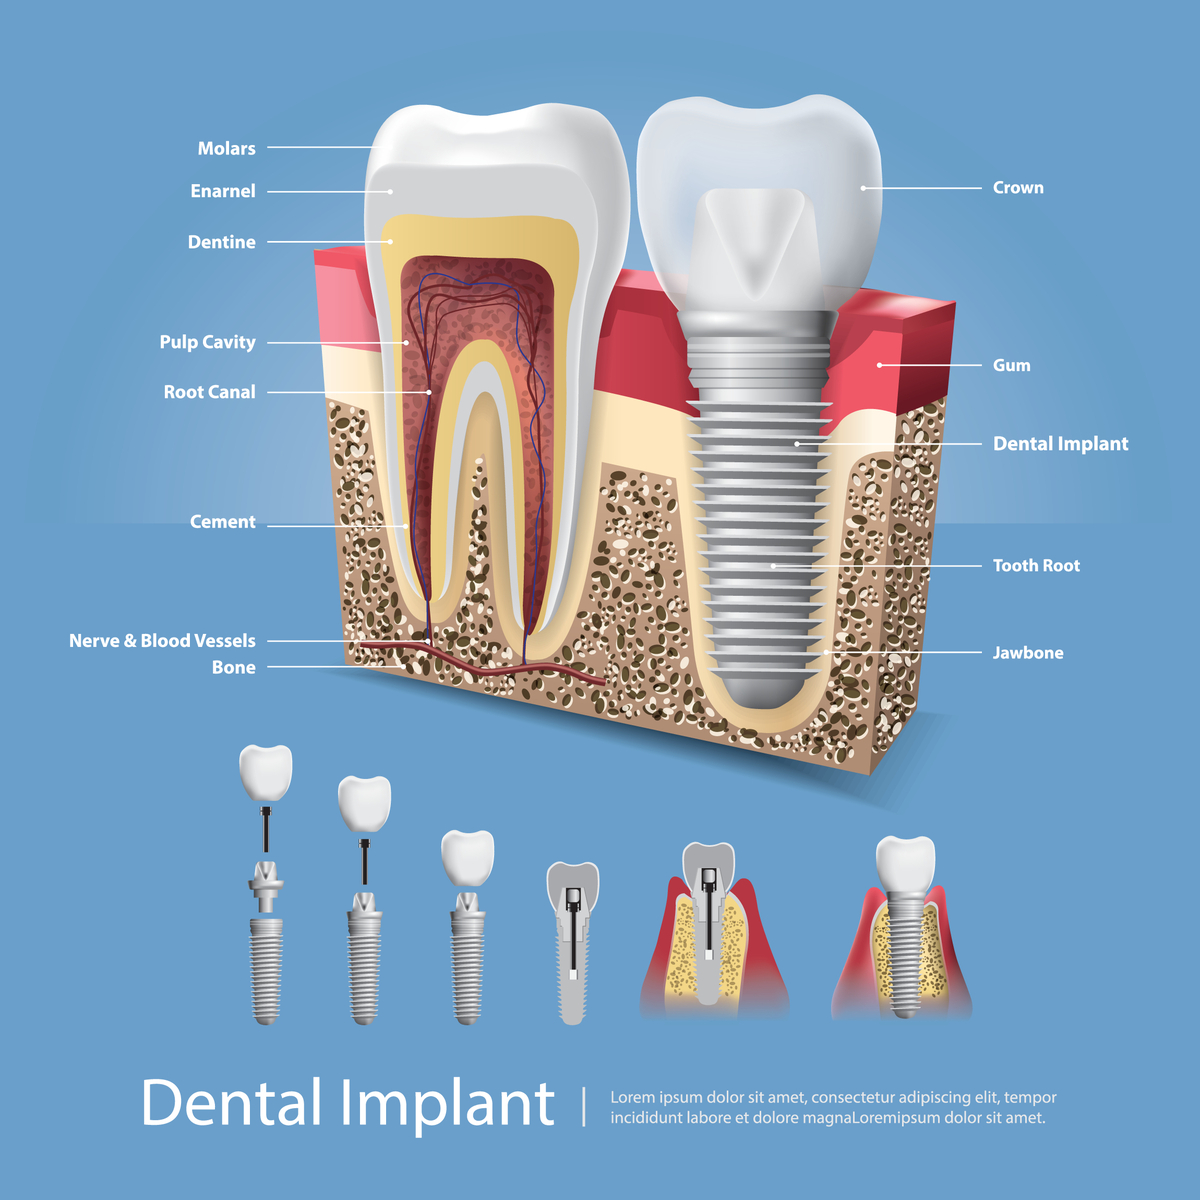 Dental Implant Normandy, MO | Tooth Pain | Restorative Dentistry | Cosmetic Dentistry Near Normandy, MO